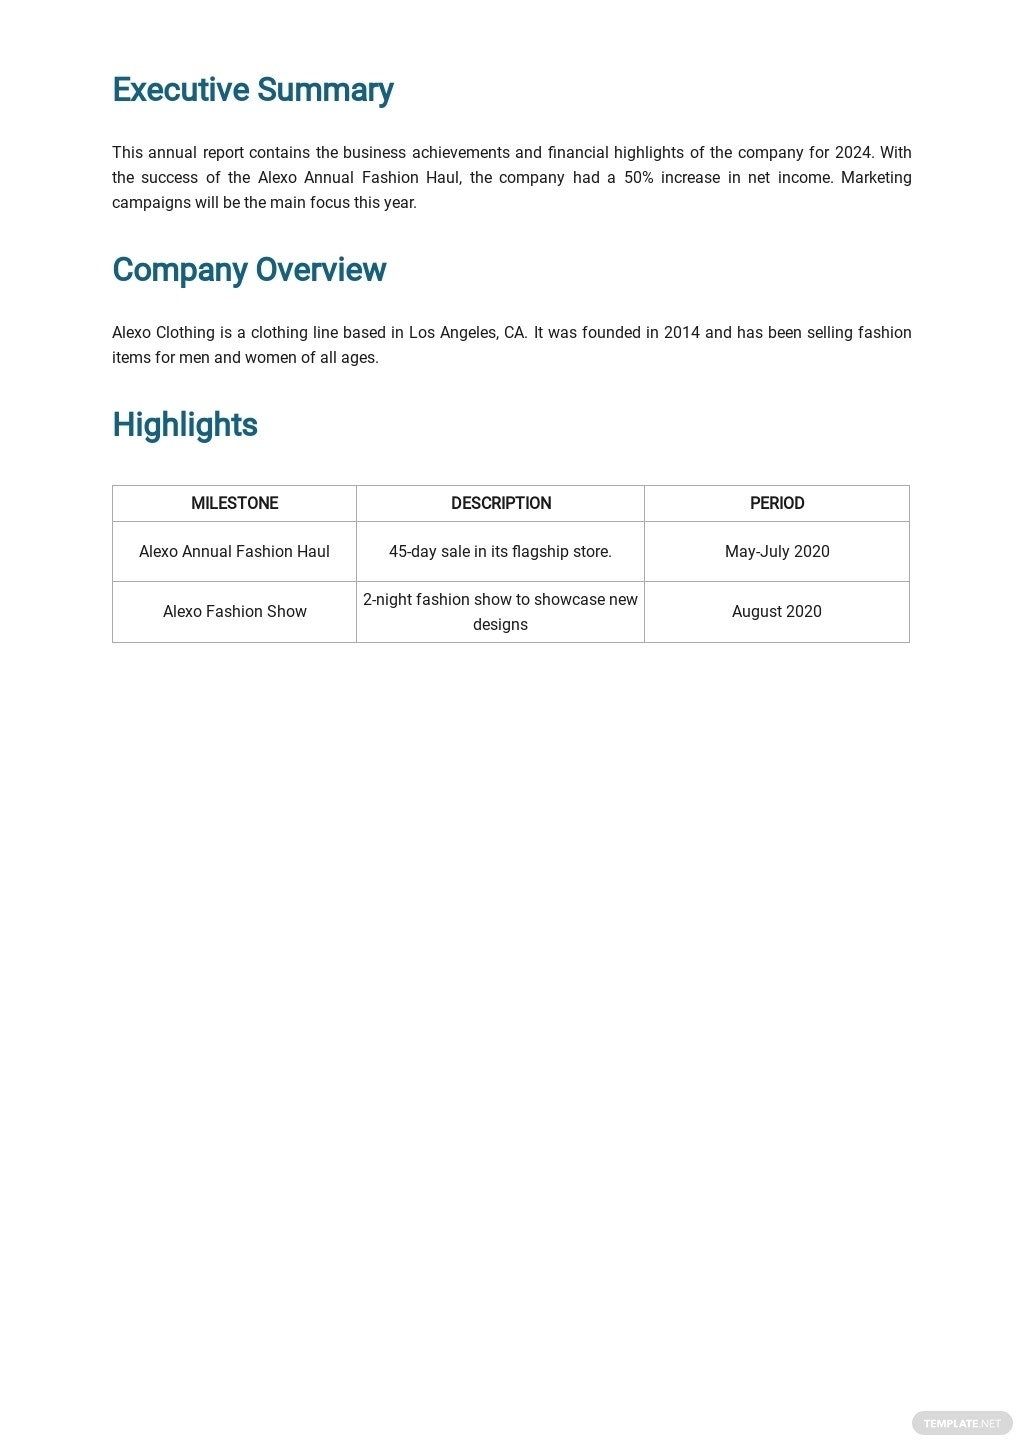 Simple Annual Report Template [Free Pdf] - Word | Apple Pages | Google Docs intended for Annual Financial Report Template Word